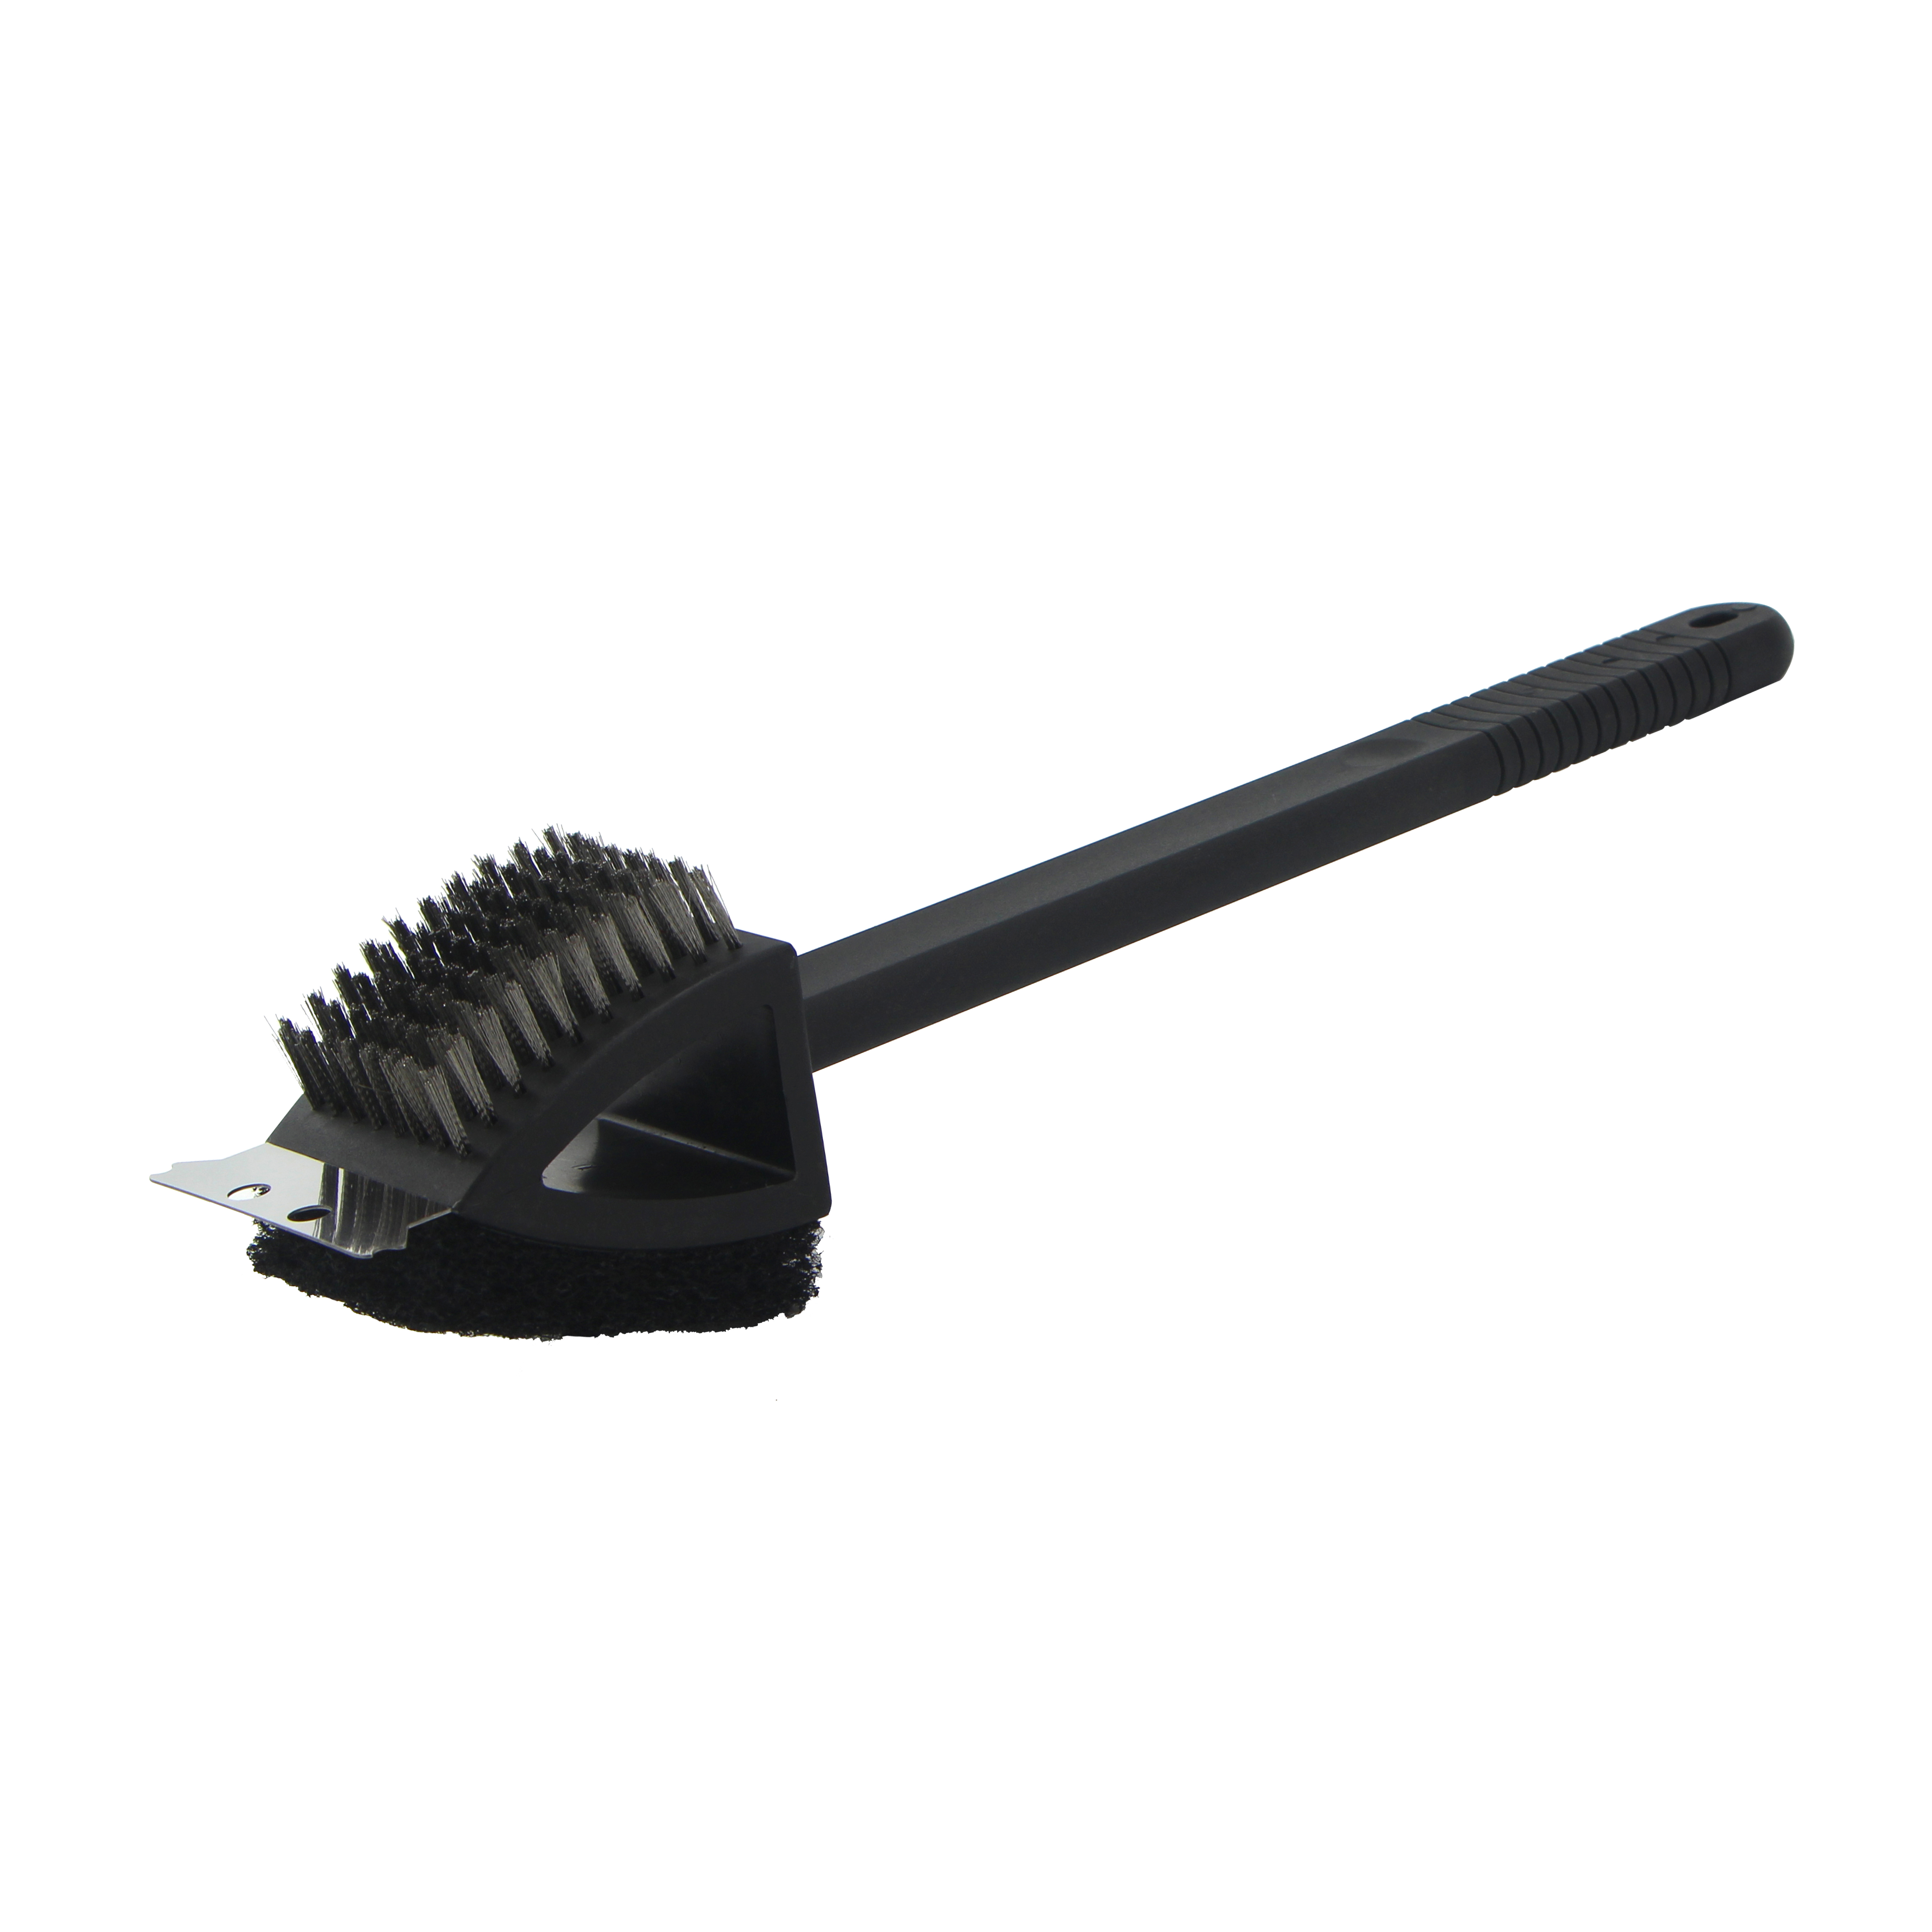 BBQ Pro Triple Action Cleaning Brush - A Functional Scrubbing Tool